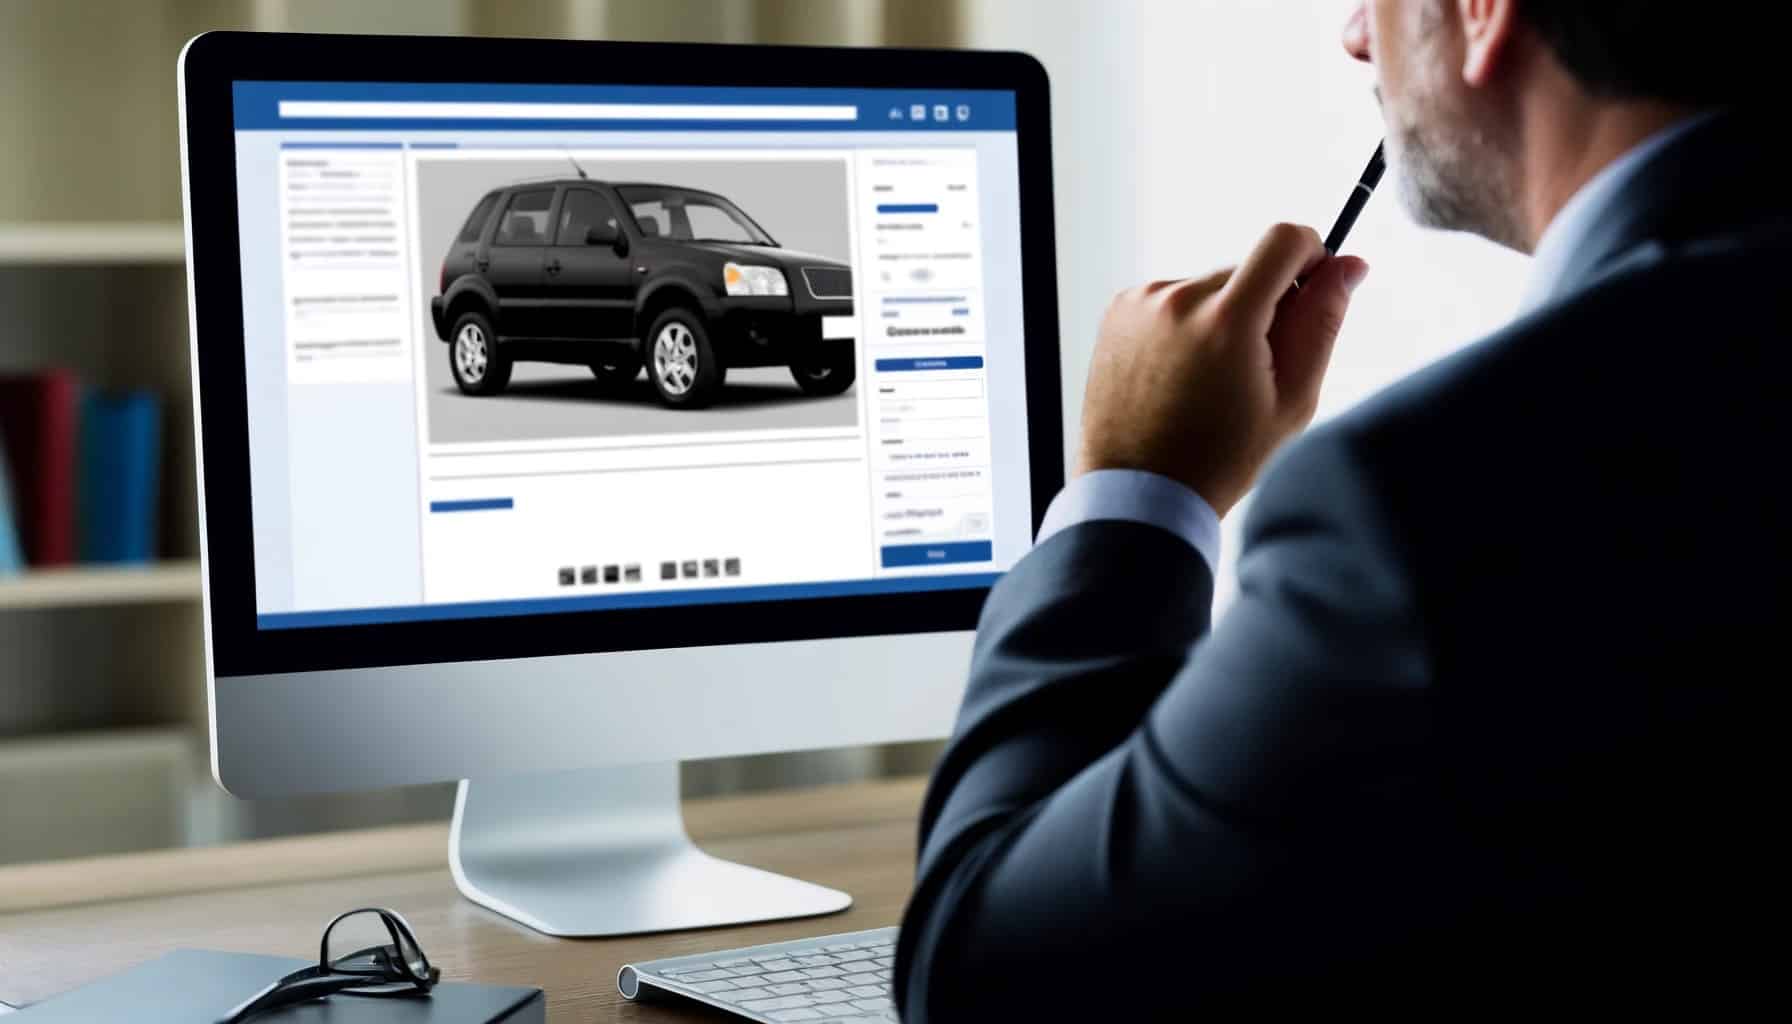 image featuring a person looking at a computer screen, displaying a car listing on a social media platform